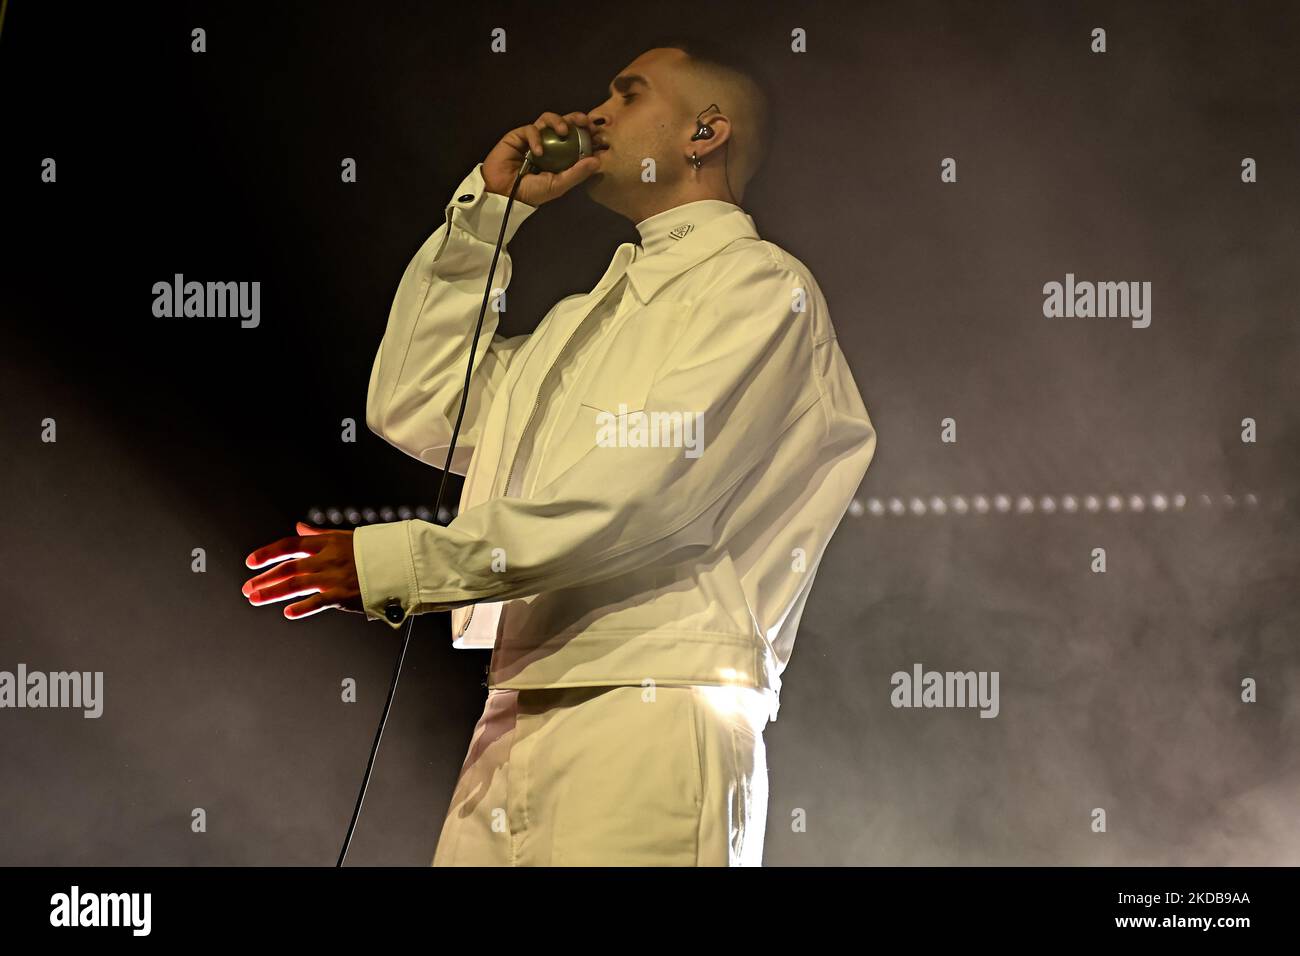 Mahmood singing on stage during the Italian singer Music Concert Mahmood - Ghettolimpo Tour 2022 on May 30, 2022 at the Alcatraz in Milan, Italy (Photo by Samantha Palazzini/LiveMedia/NurPhoto) Stock Photo